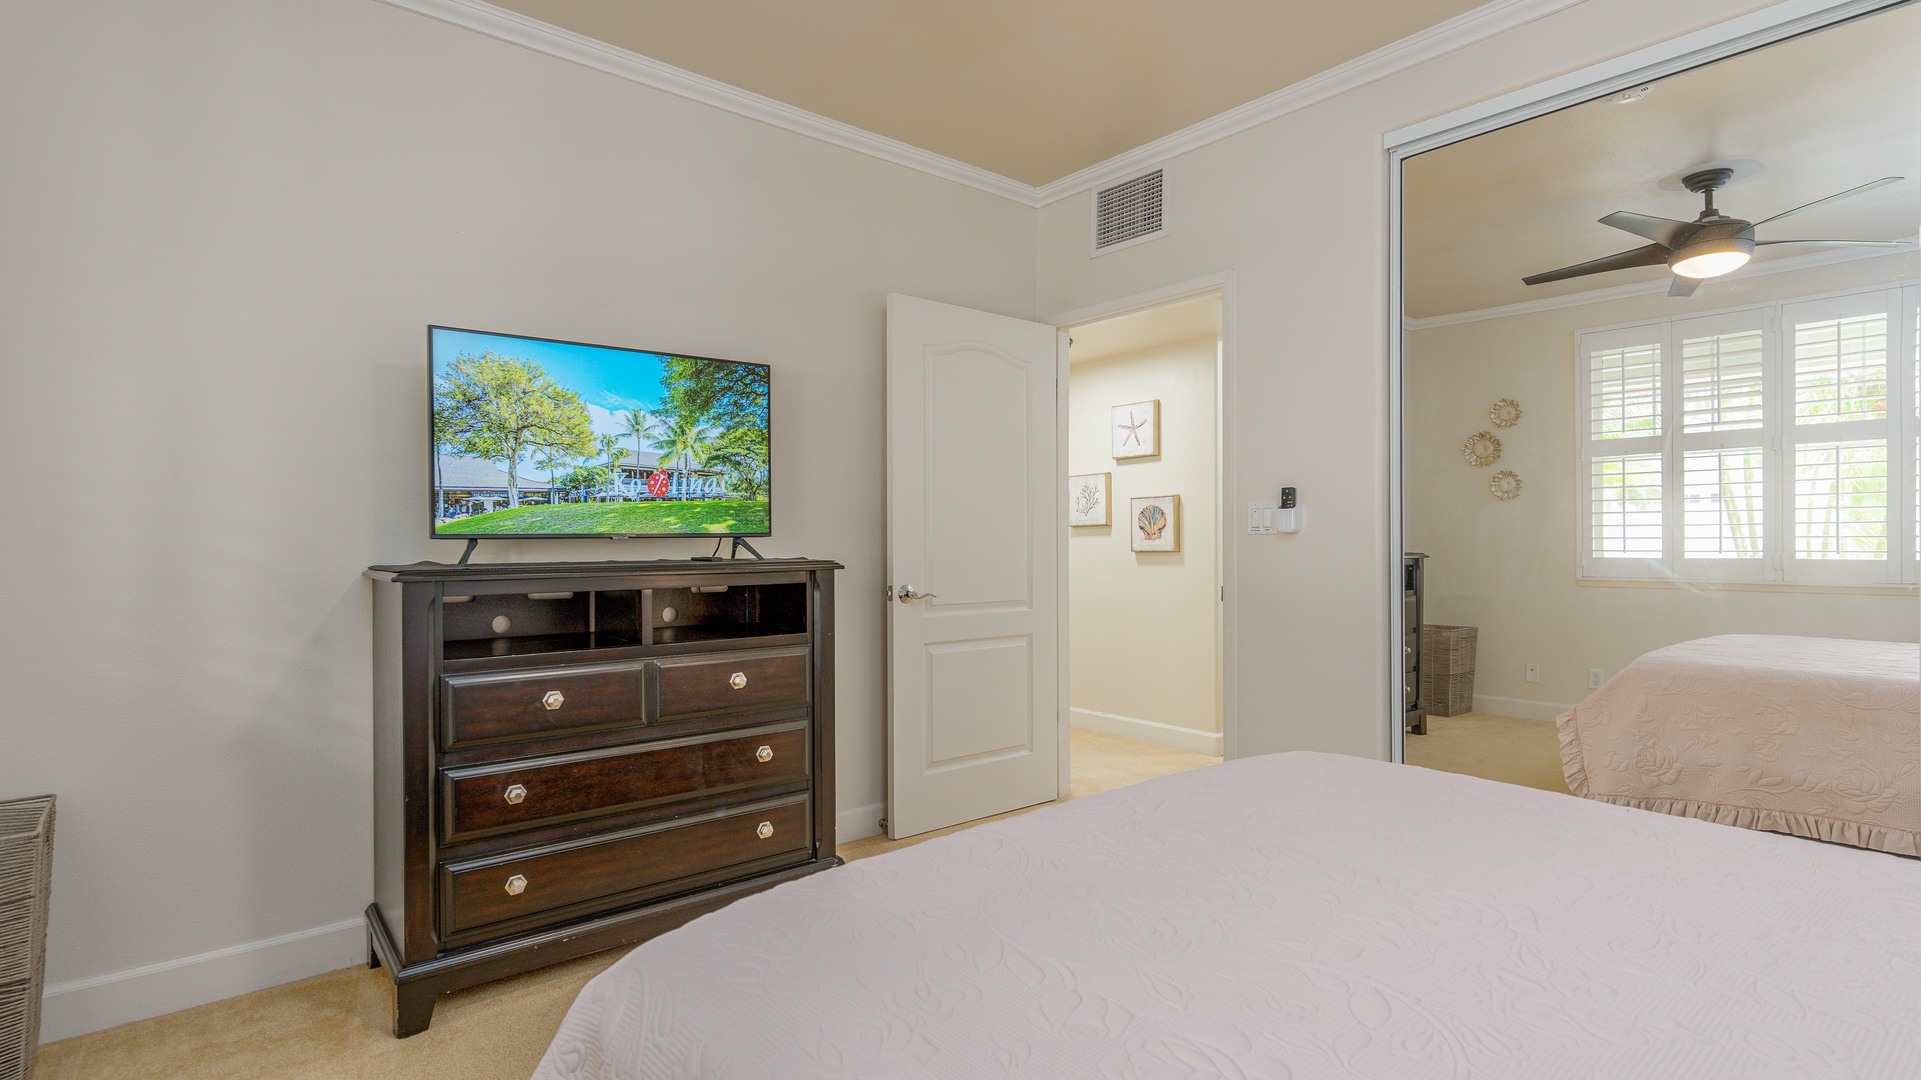 Kapolei Vacation Rentals, Ko Olina Kai 1027A - The second guest bedroom with a dresser and TV.